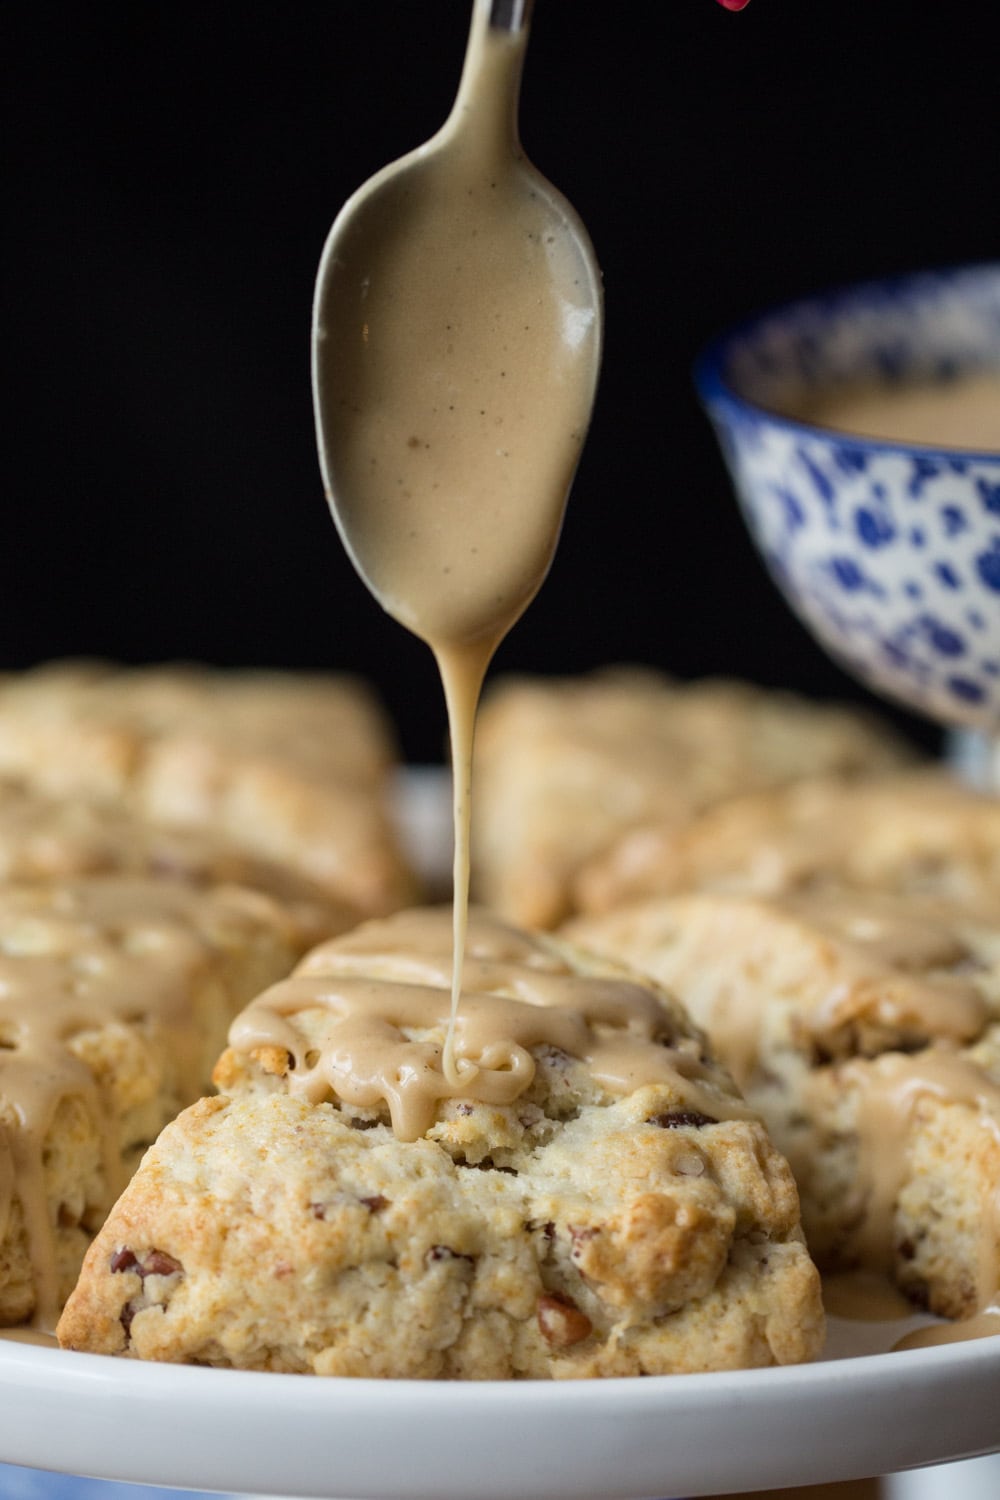 Ridiculously Easy Maple Pecan Scones - A crazy-simple technique for incredibly delicious, pecan-studded, melt-in-your-mouth scones finished off with a drizzle of sweet, maple-infused glaze! scones finished off with a drizzle of sweet, maple-infused glaze. thecafesucrefarine.com